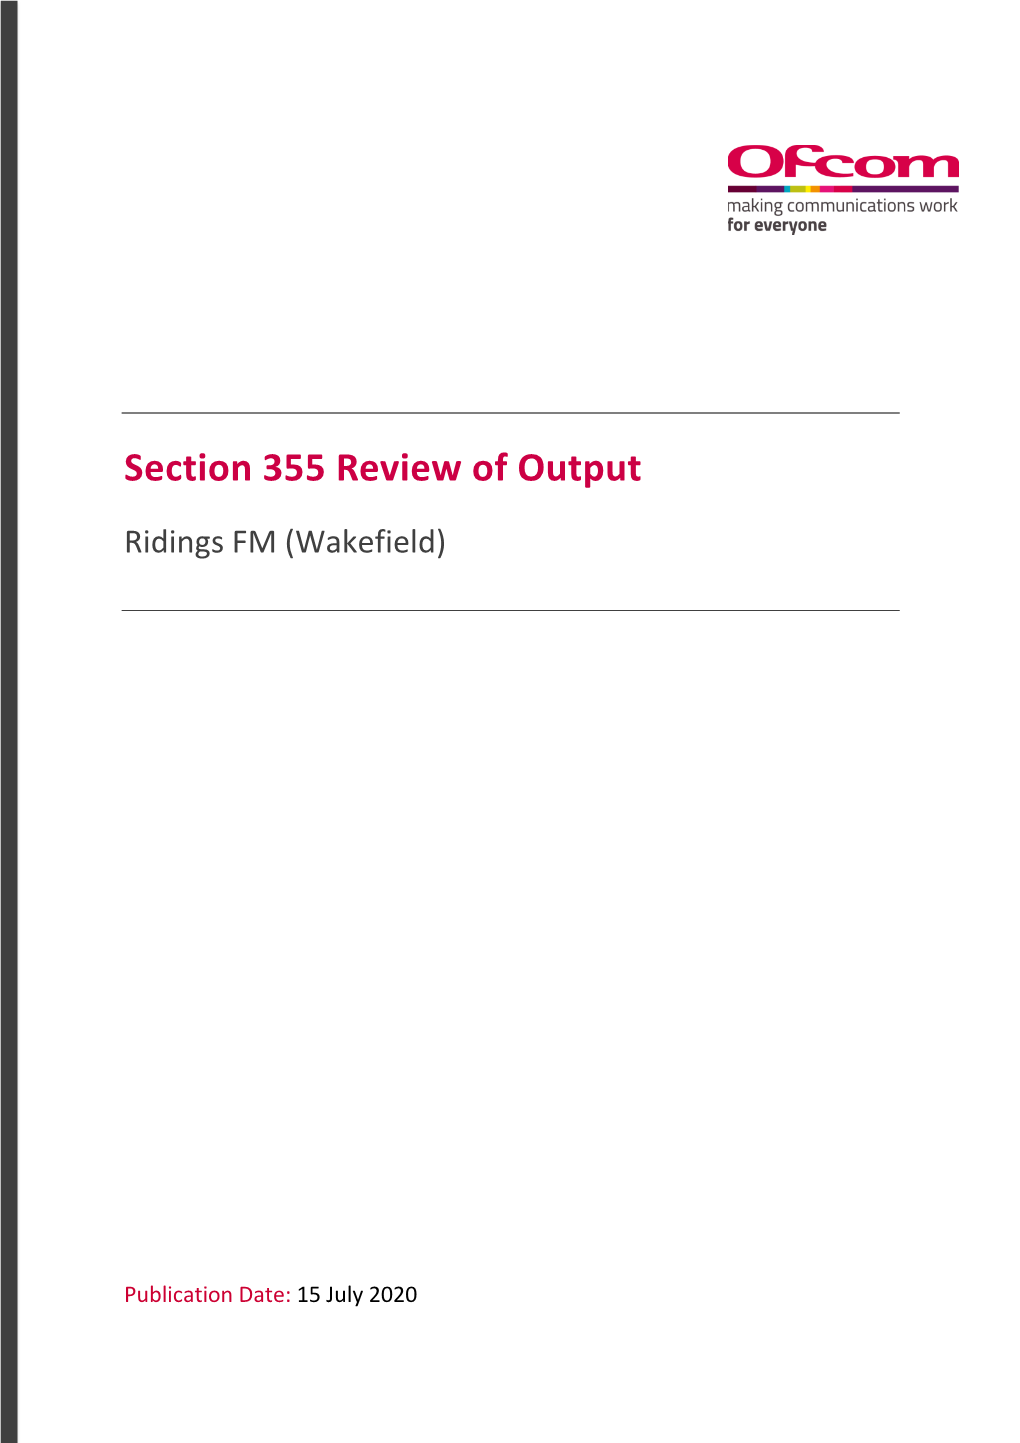 Section 355 Review of Output